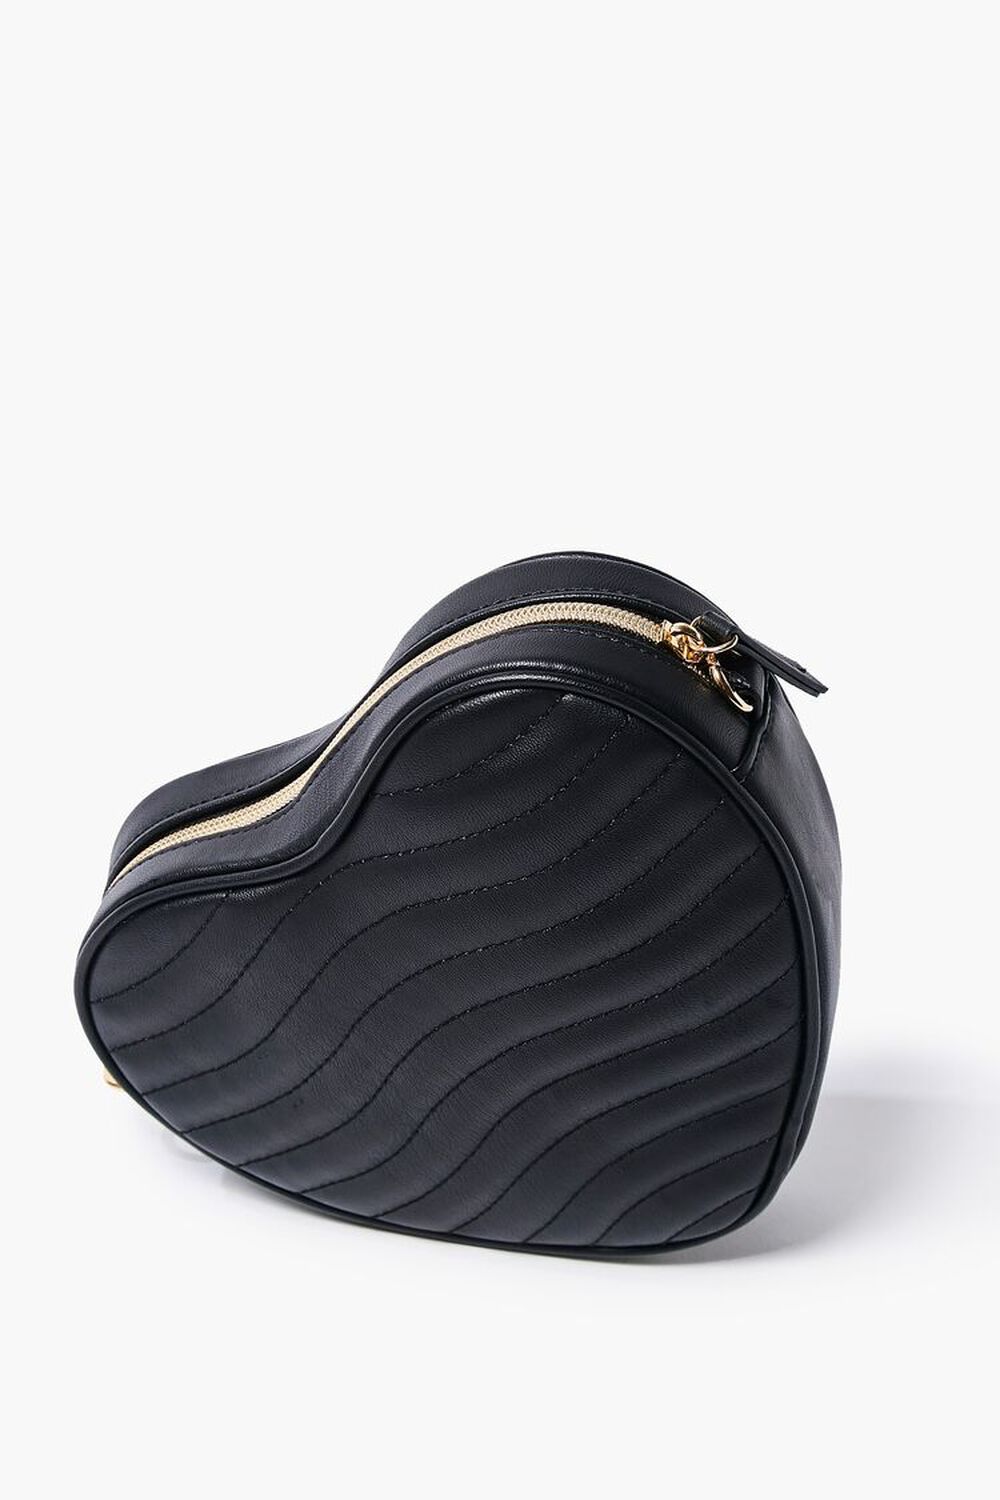 BLACK Quilted Heart-Shaped Crossbody Bag, image 1